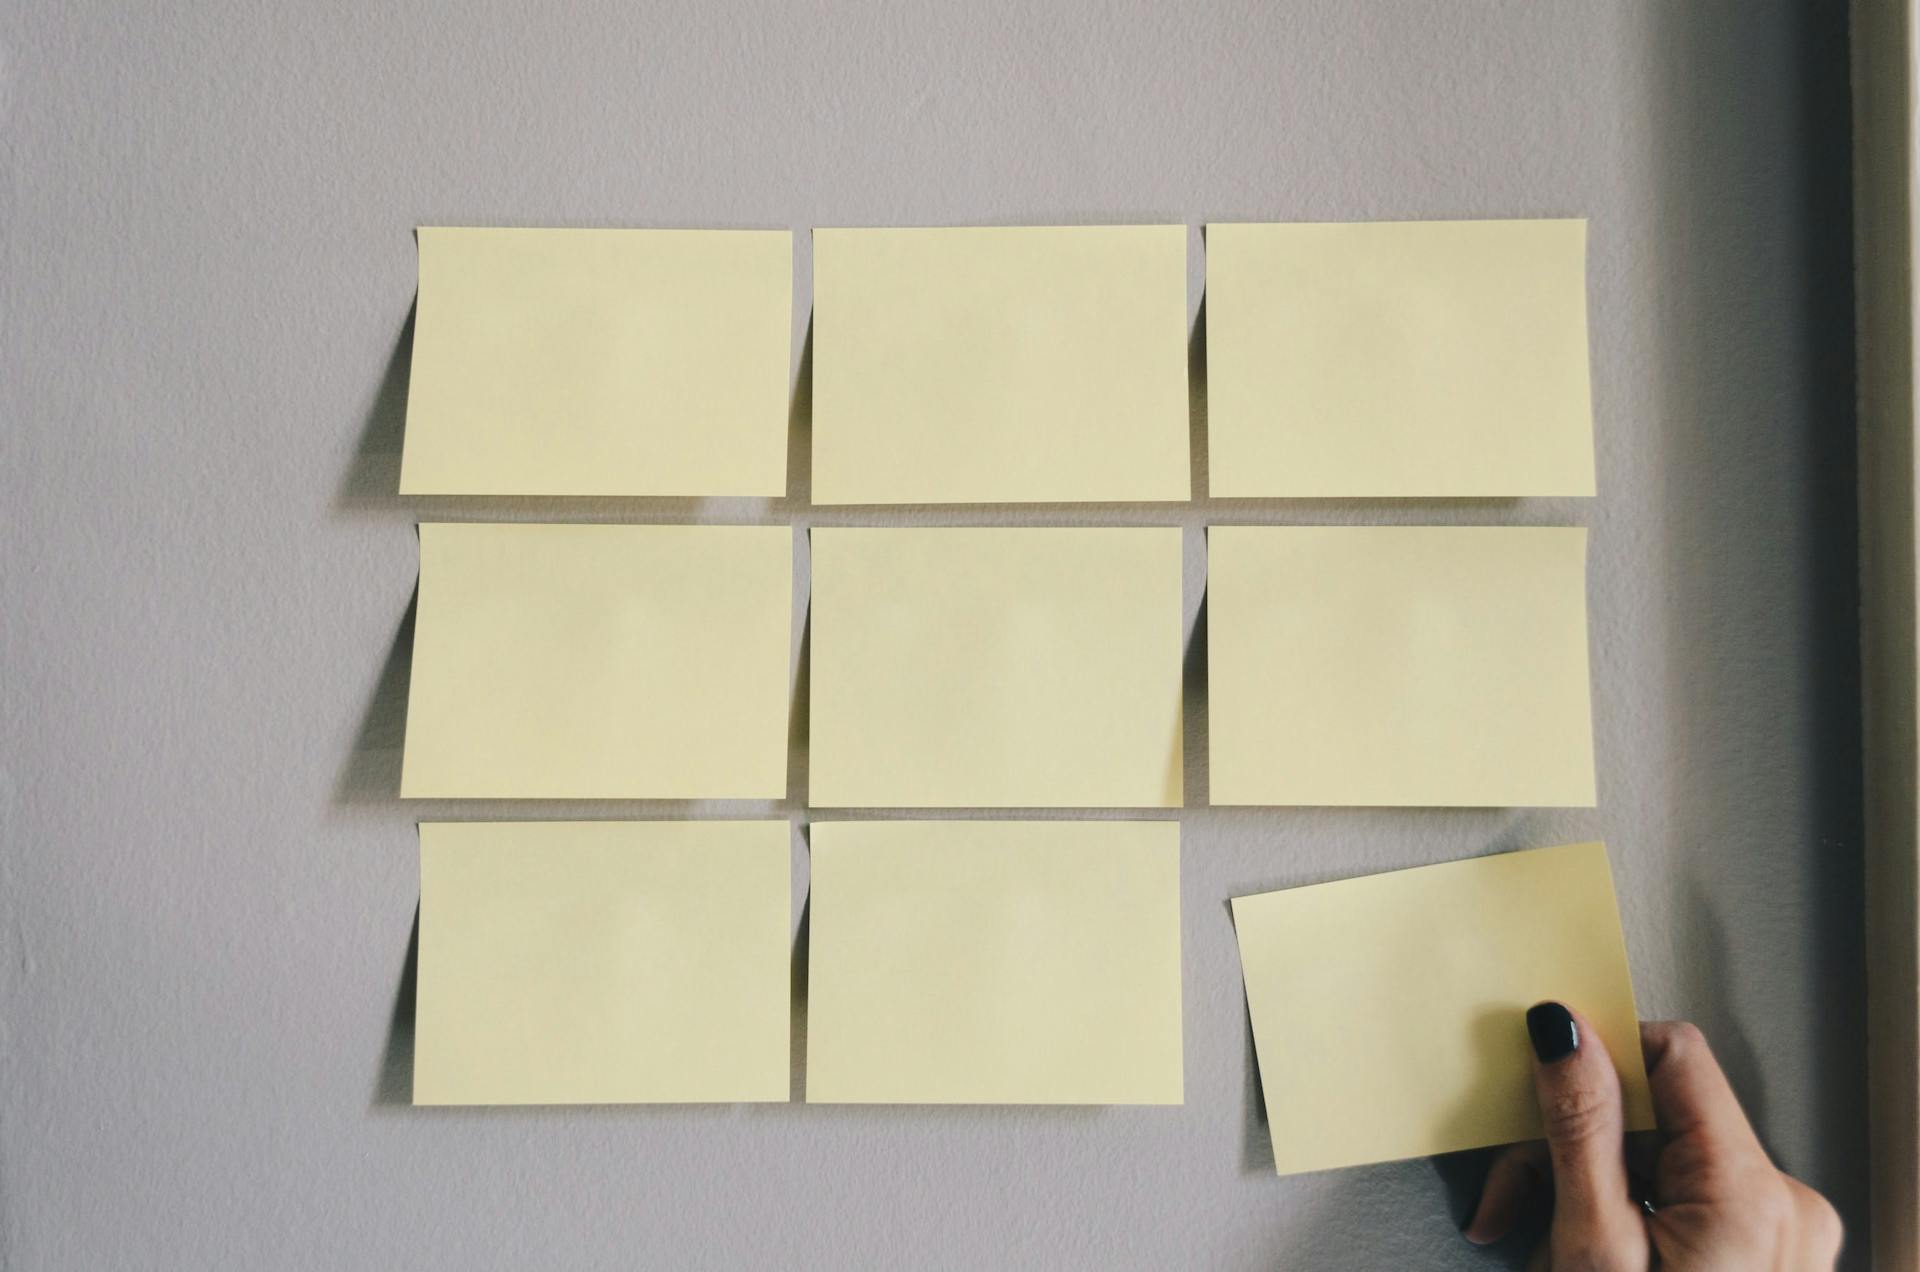 Grid of blank sticky notes with woman's hand adding final sticky note to the bottom row.